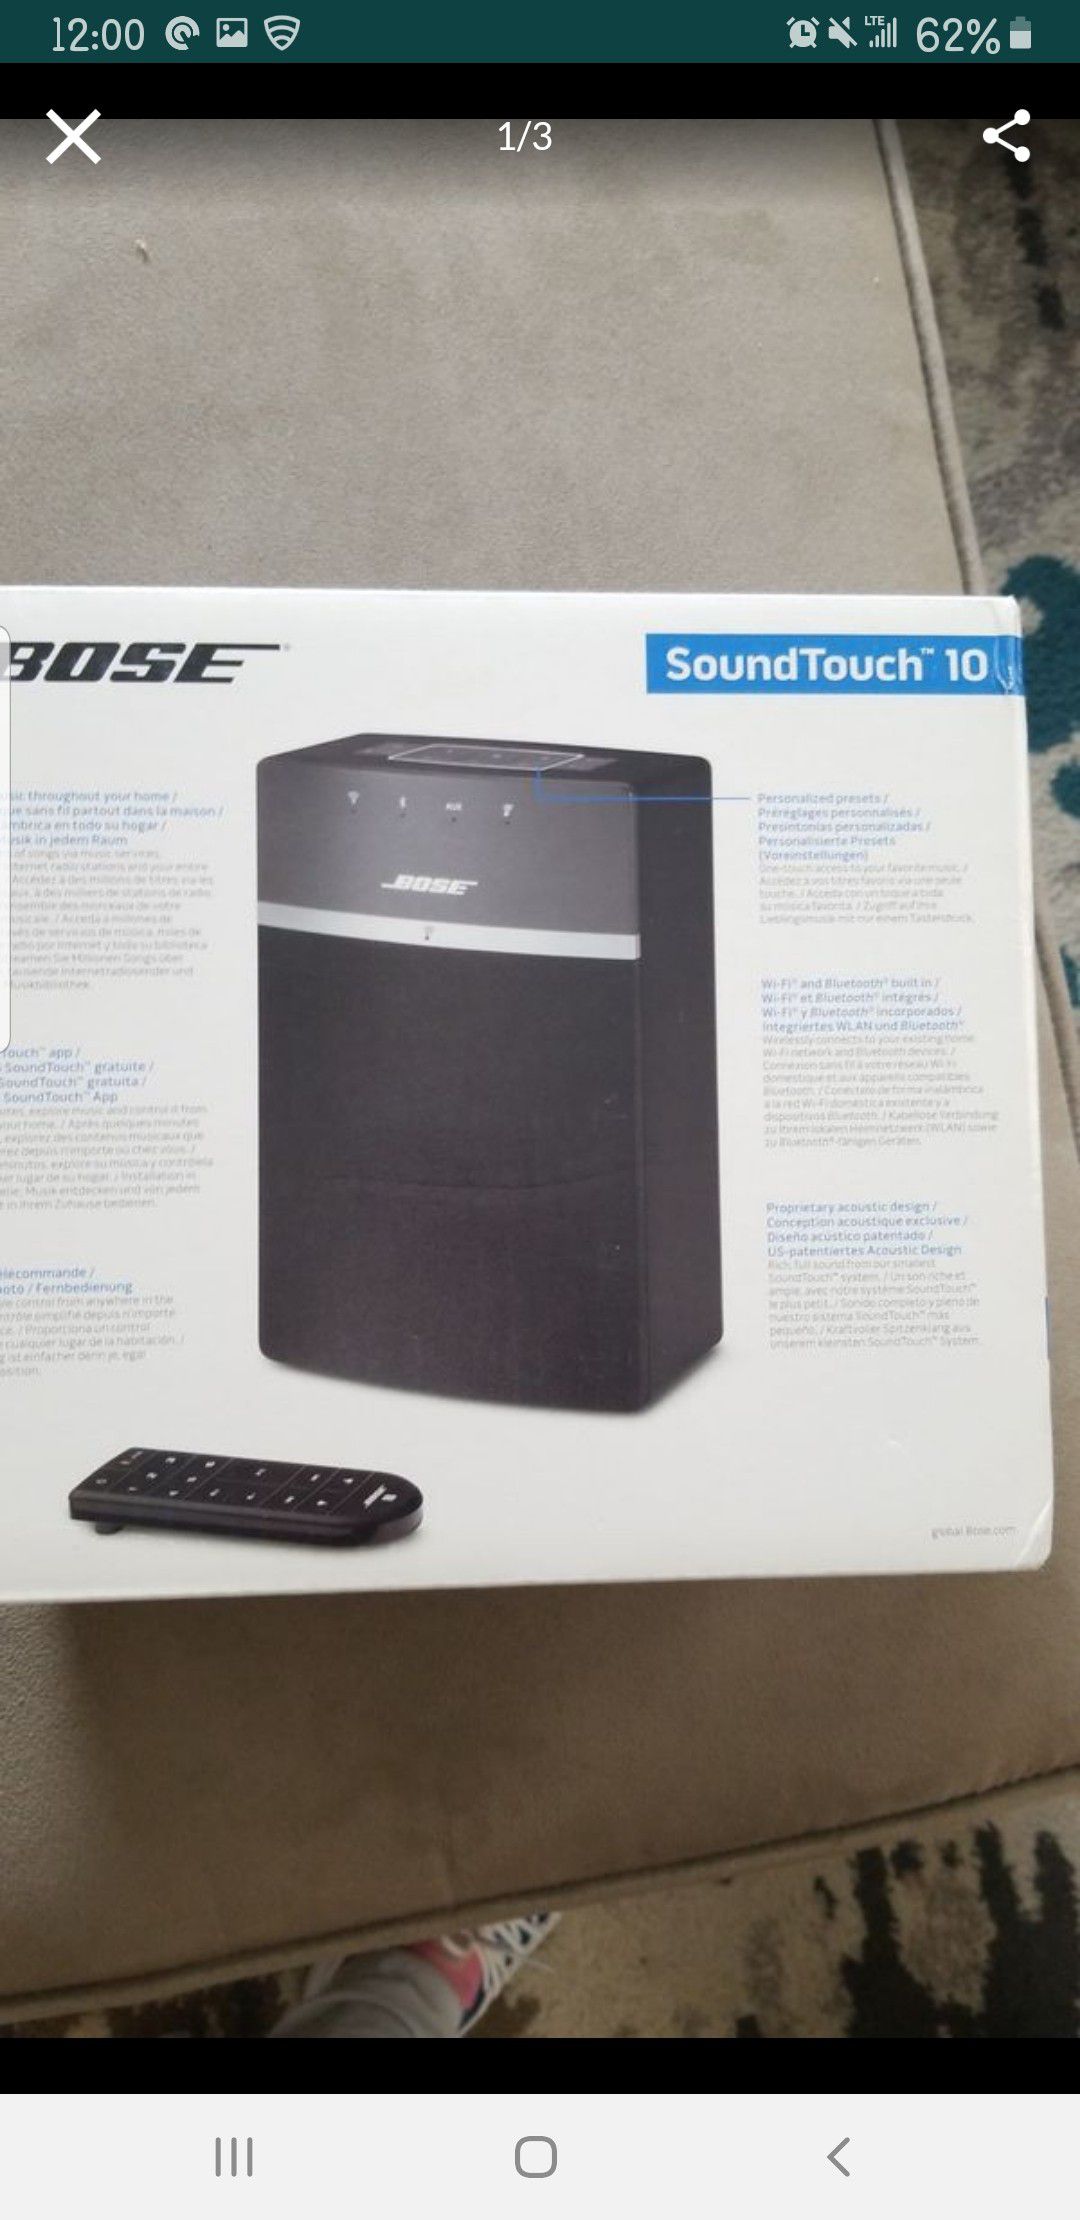 Bose soundtouch 10wireless music system